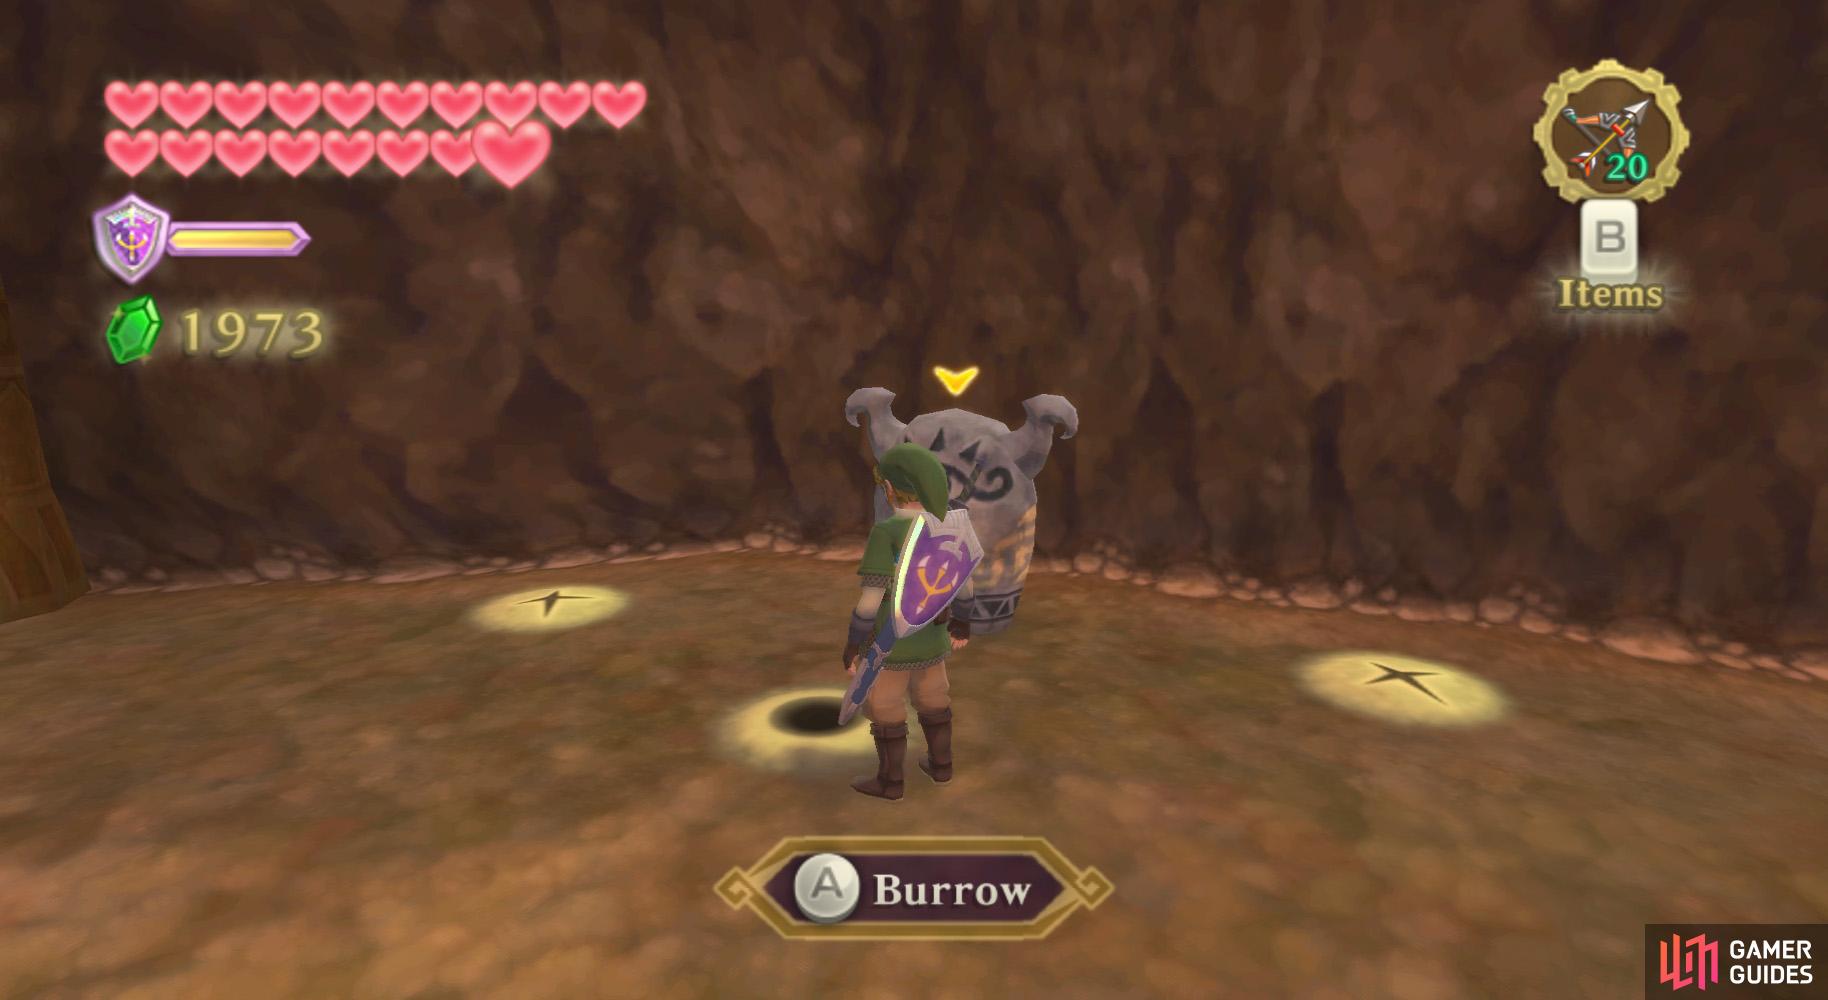 Use the Mogma Mitts to burrow in the cavern just before the Fire Sanctuary entrance.